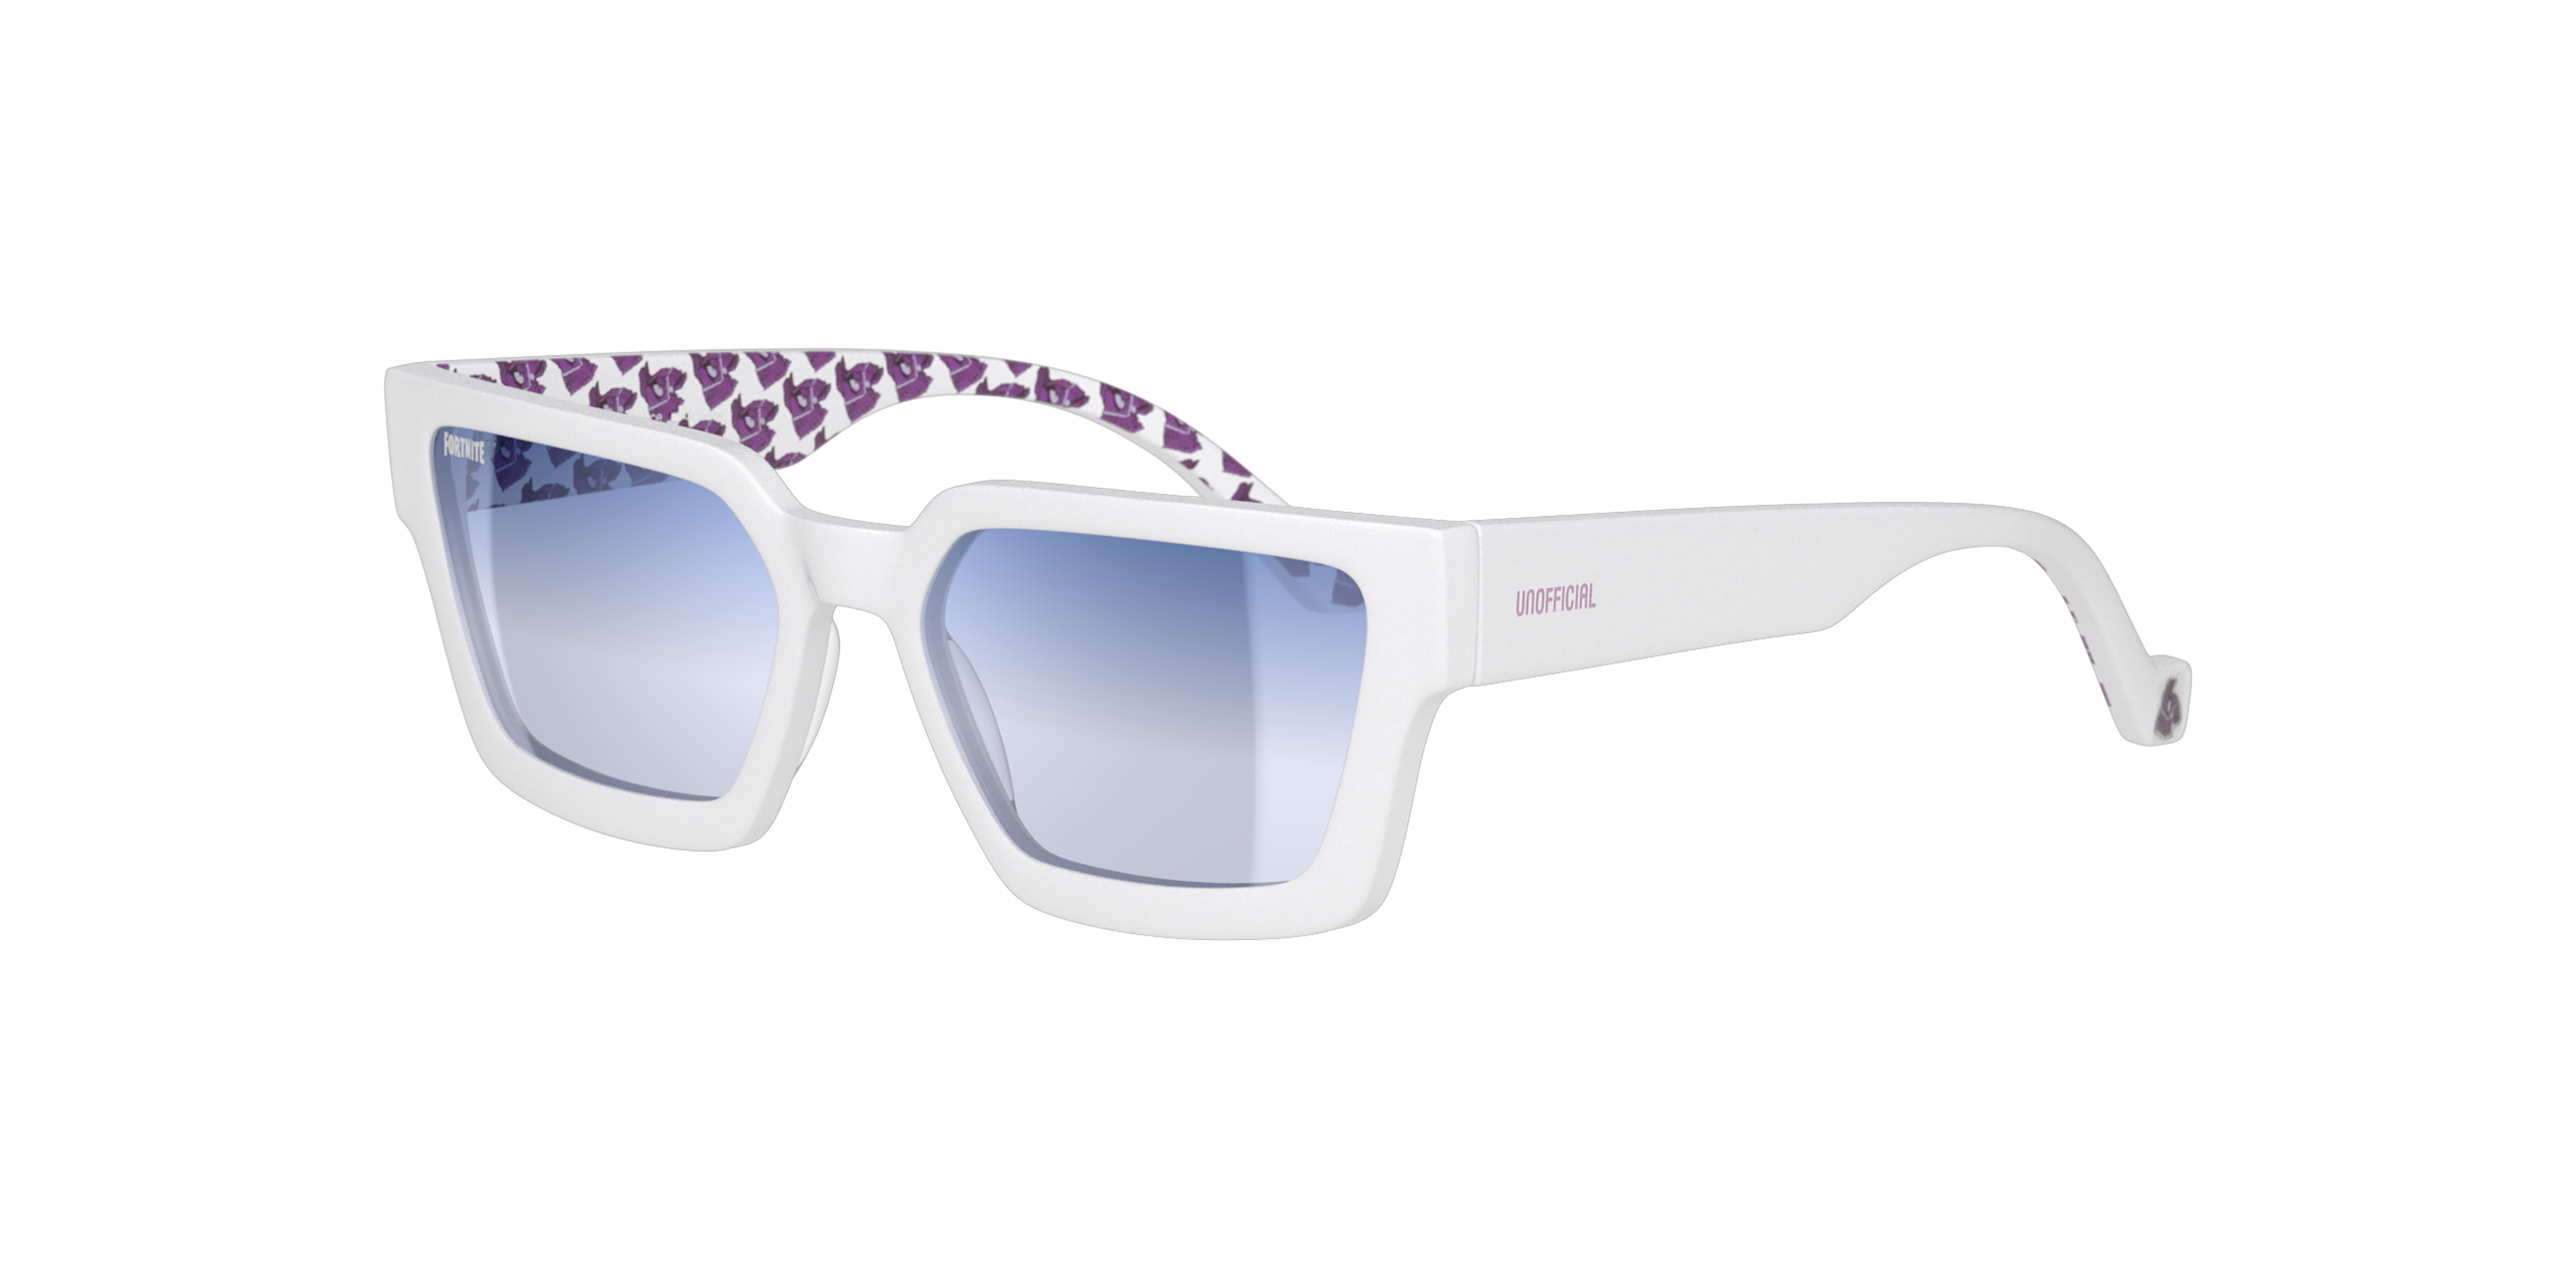 Angle_Left01 Fortnite with Unofficial UNSU0150 Sunglasses Violet / White